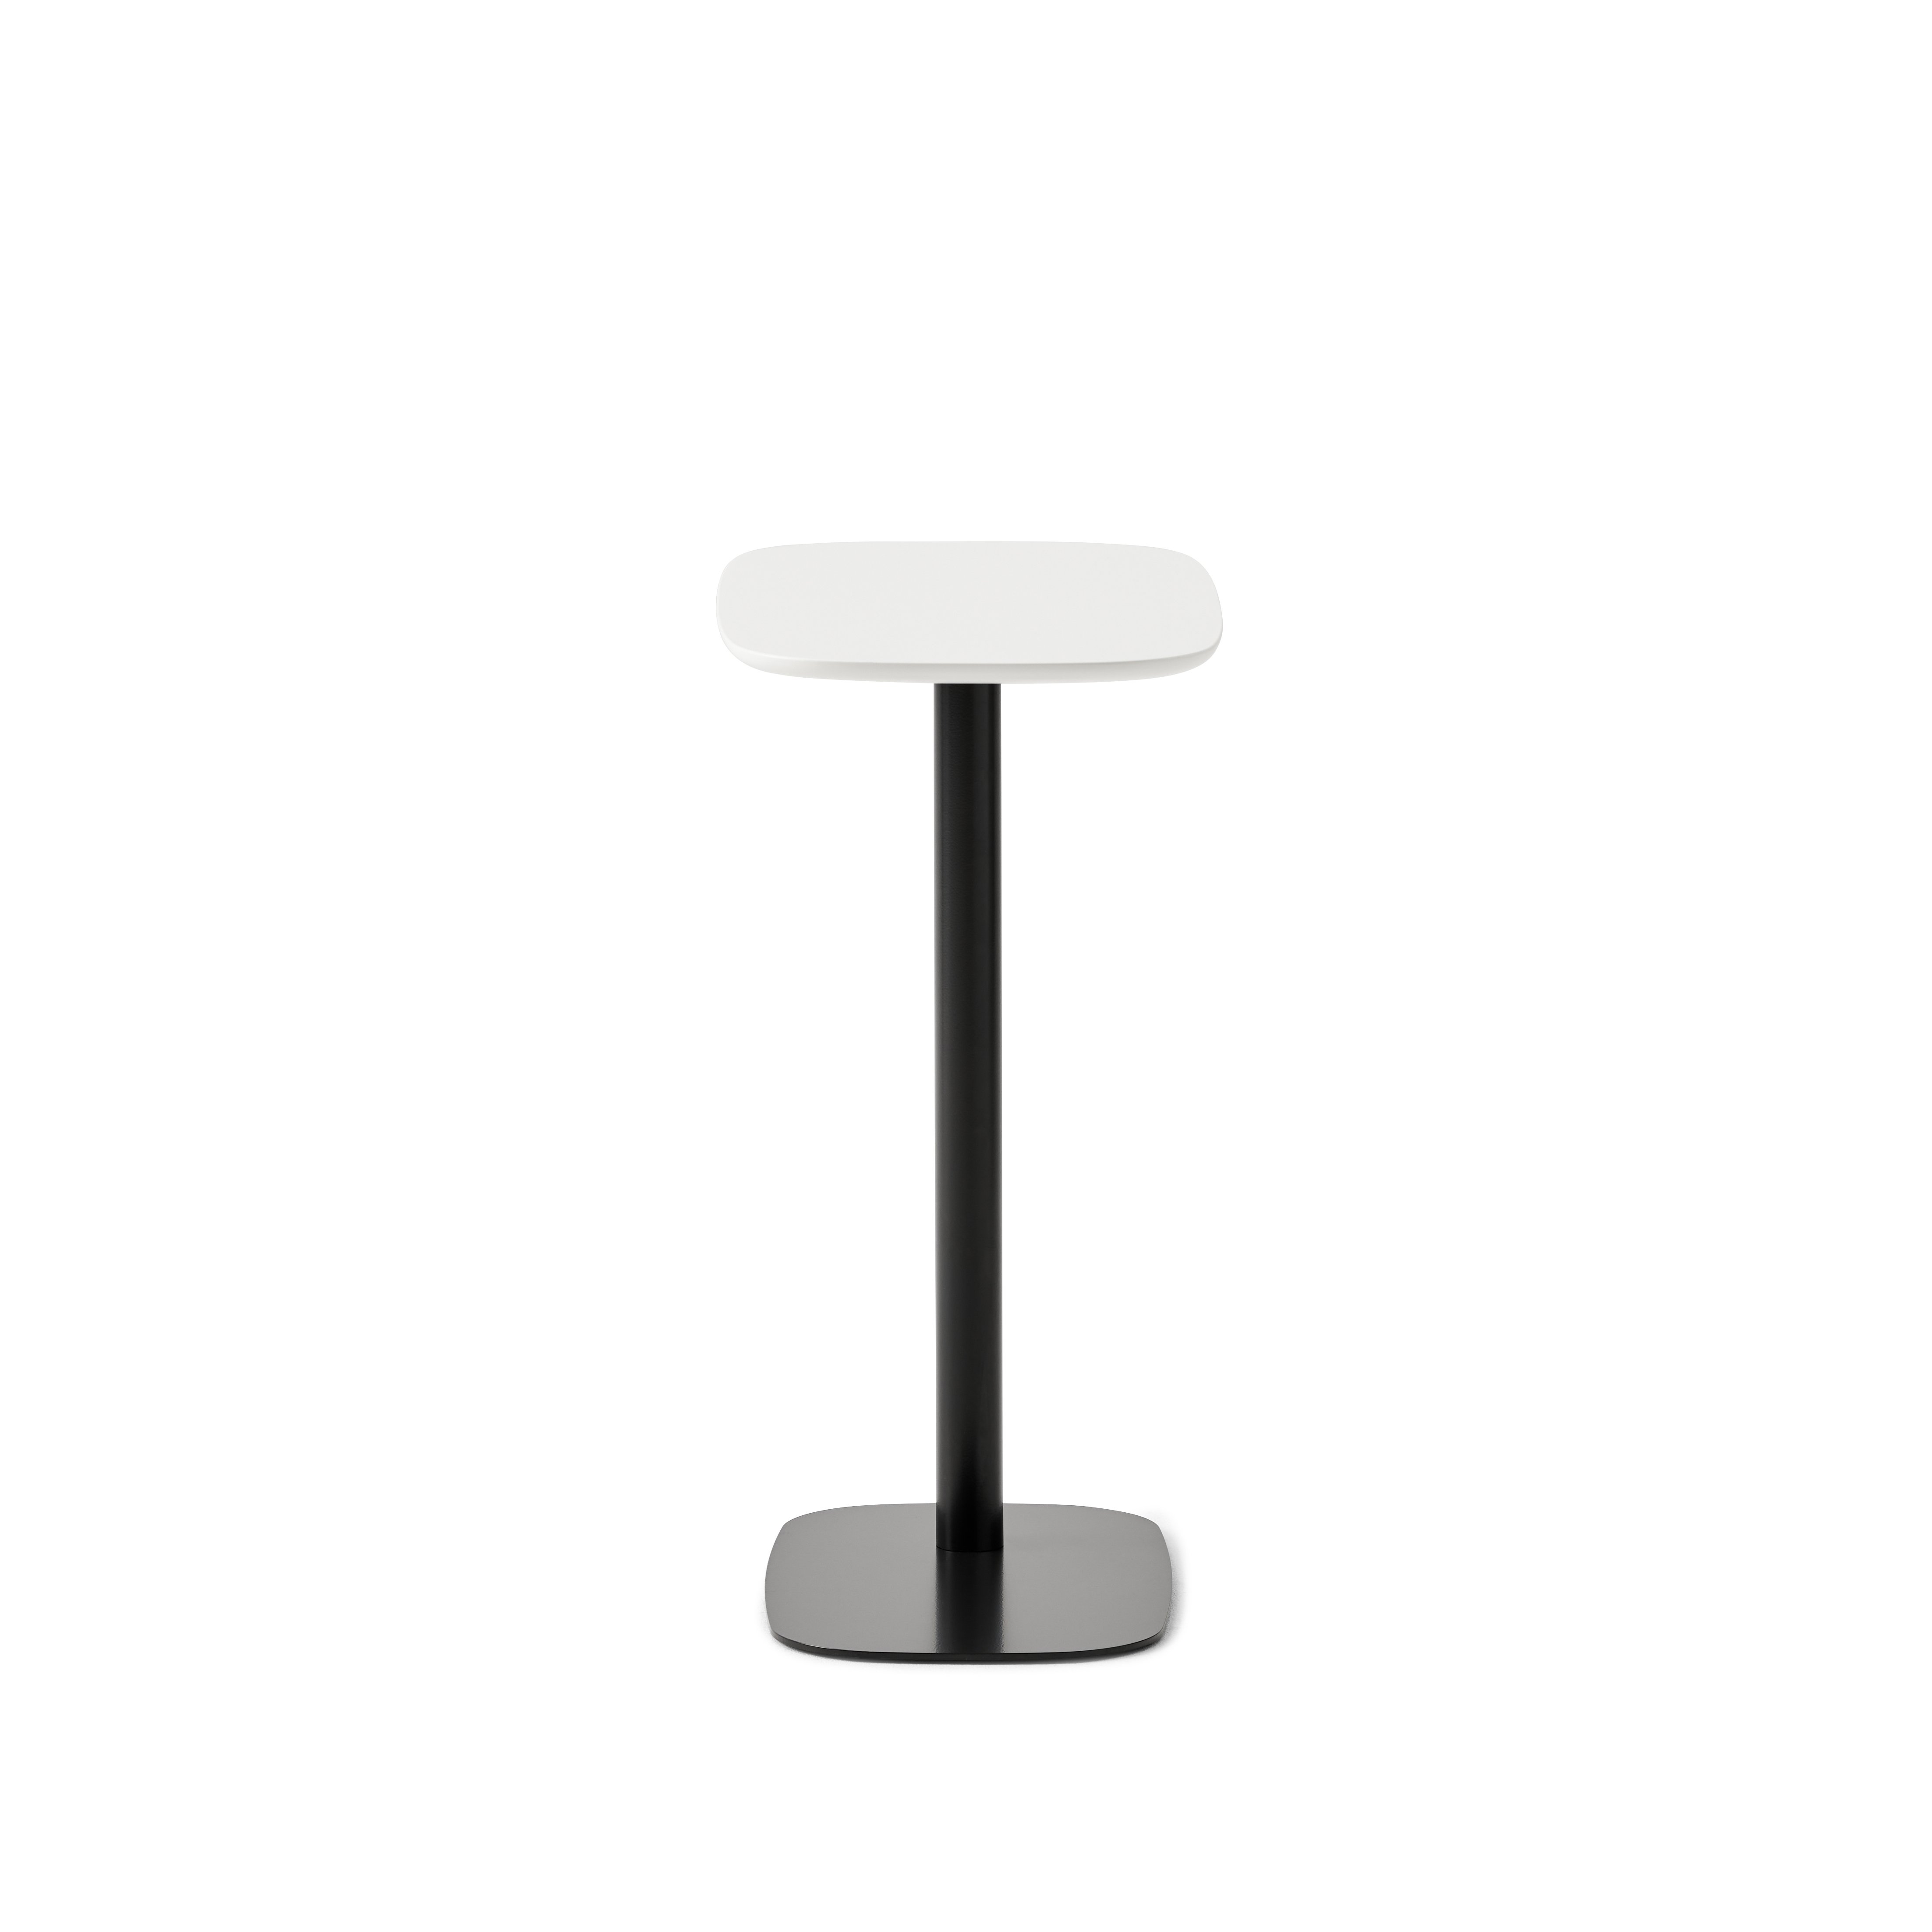 Detail front shot of Pip Table with White top and Black base